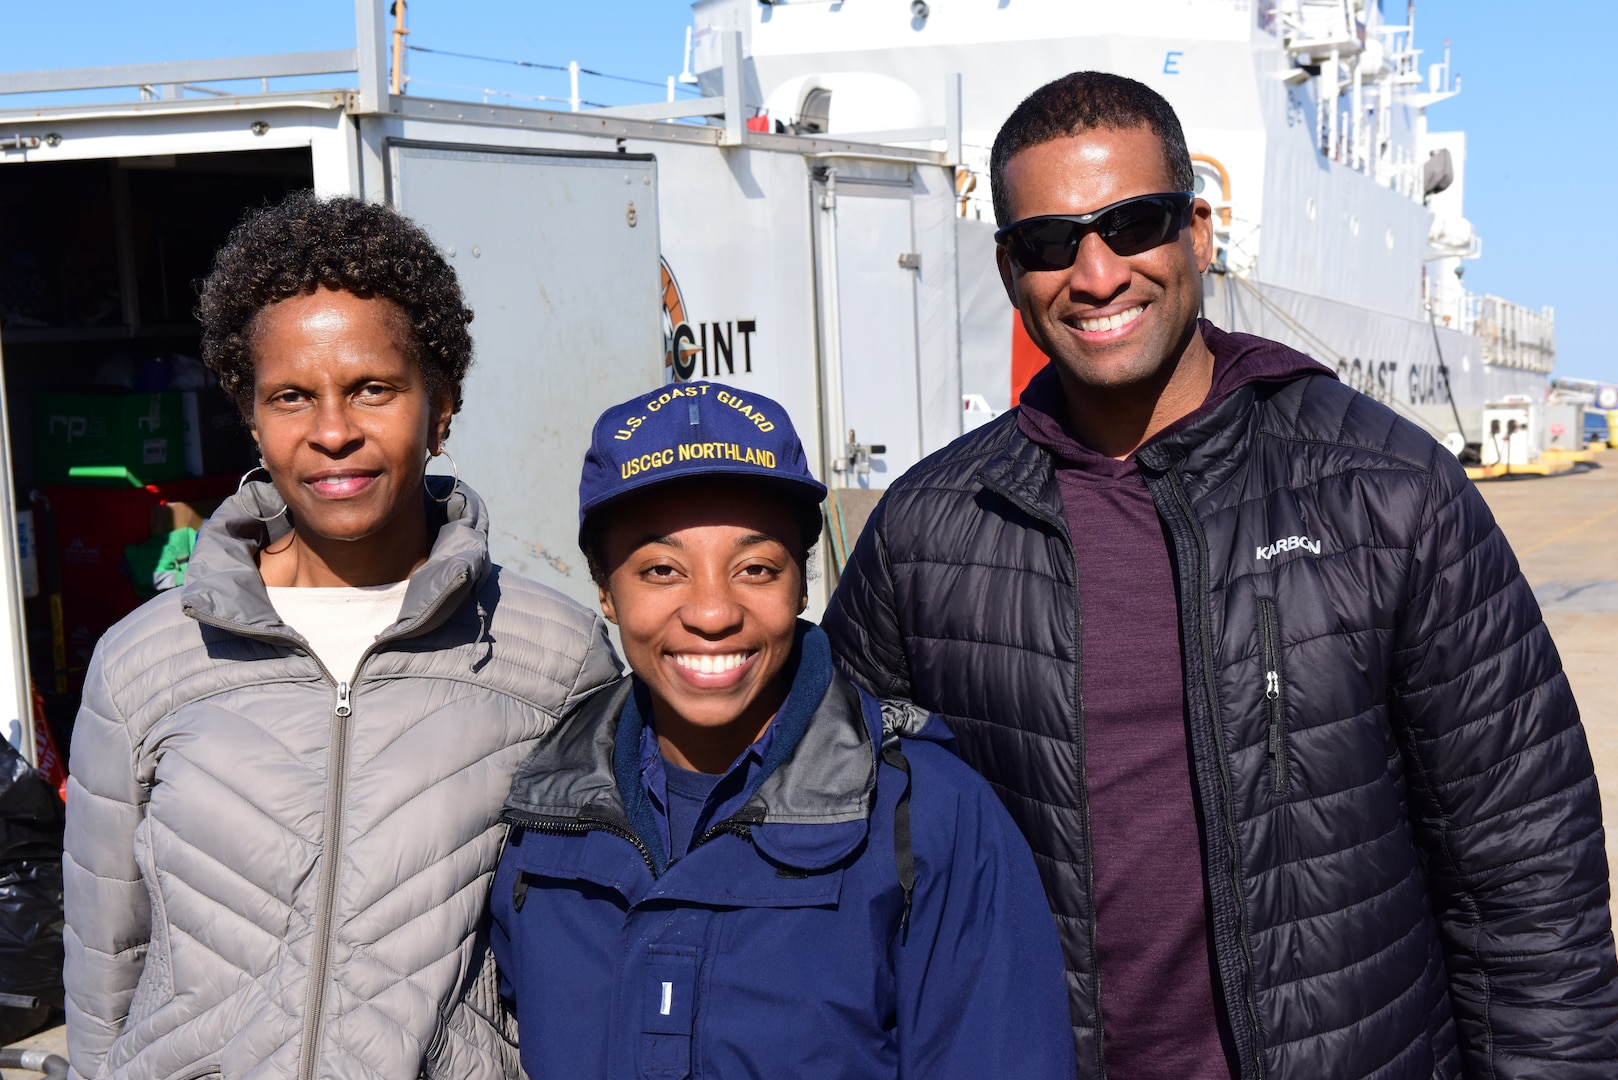 Lt. j.g. Briana Willis poses for a photo with loved ones after the USCGC Northland (WMEC 904) returned home, March 30, 2023 in Portsmouth, Virginia. Northland conducted a 62-day maritime safety and security deployment in the Florida Straits and Windward Passage while patrolling in support of Homeland Security Task Force – Southeast and Operation Vigilant Sentry. (U.S. Coast Guard photo by Petty Officer 2nd Class Brandon Hillard)